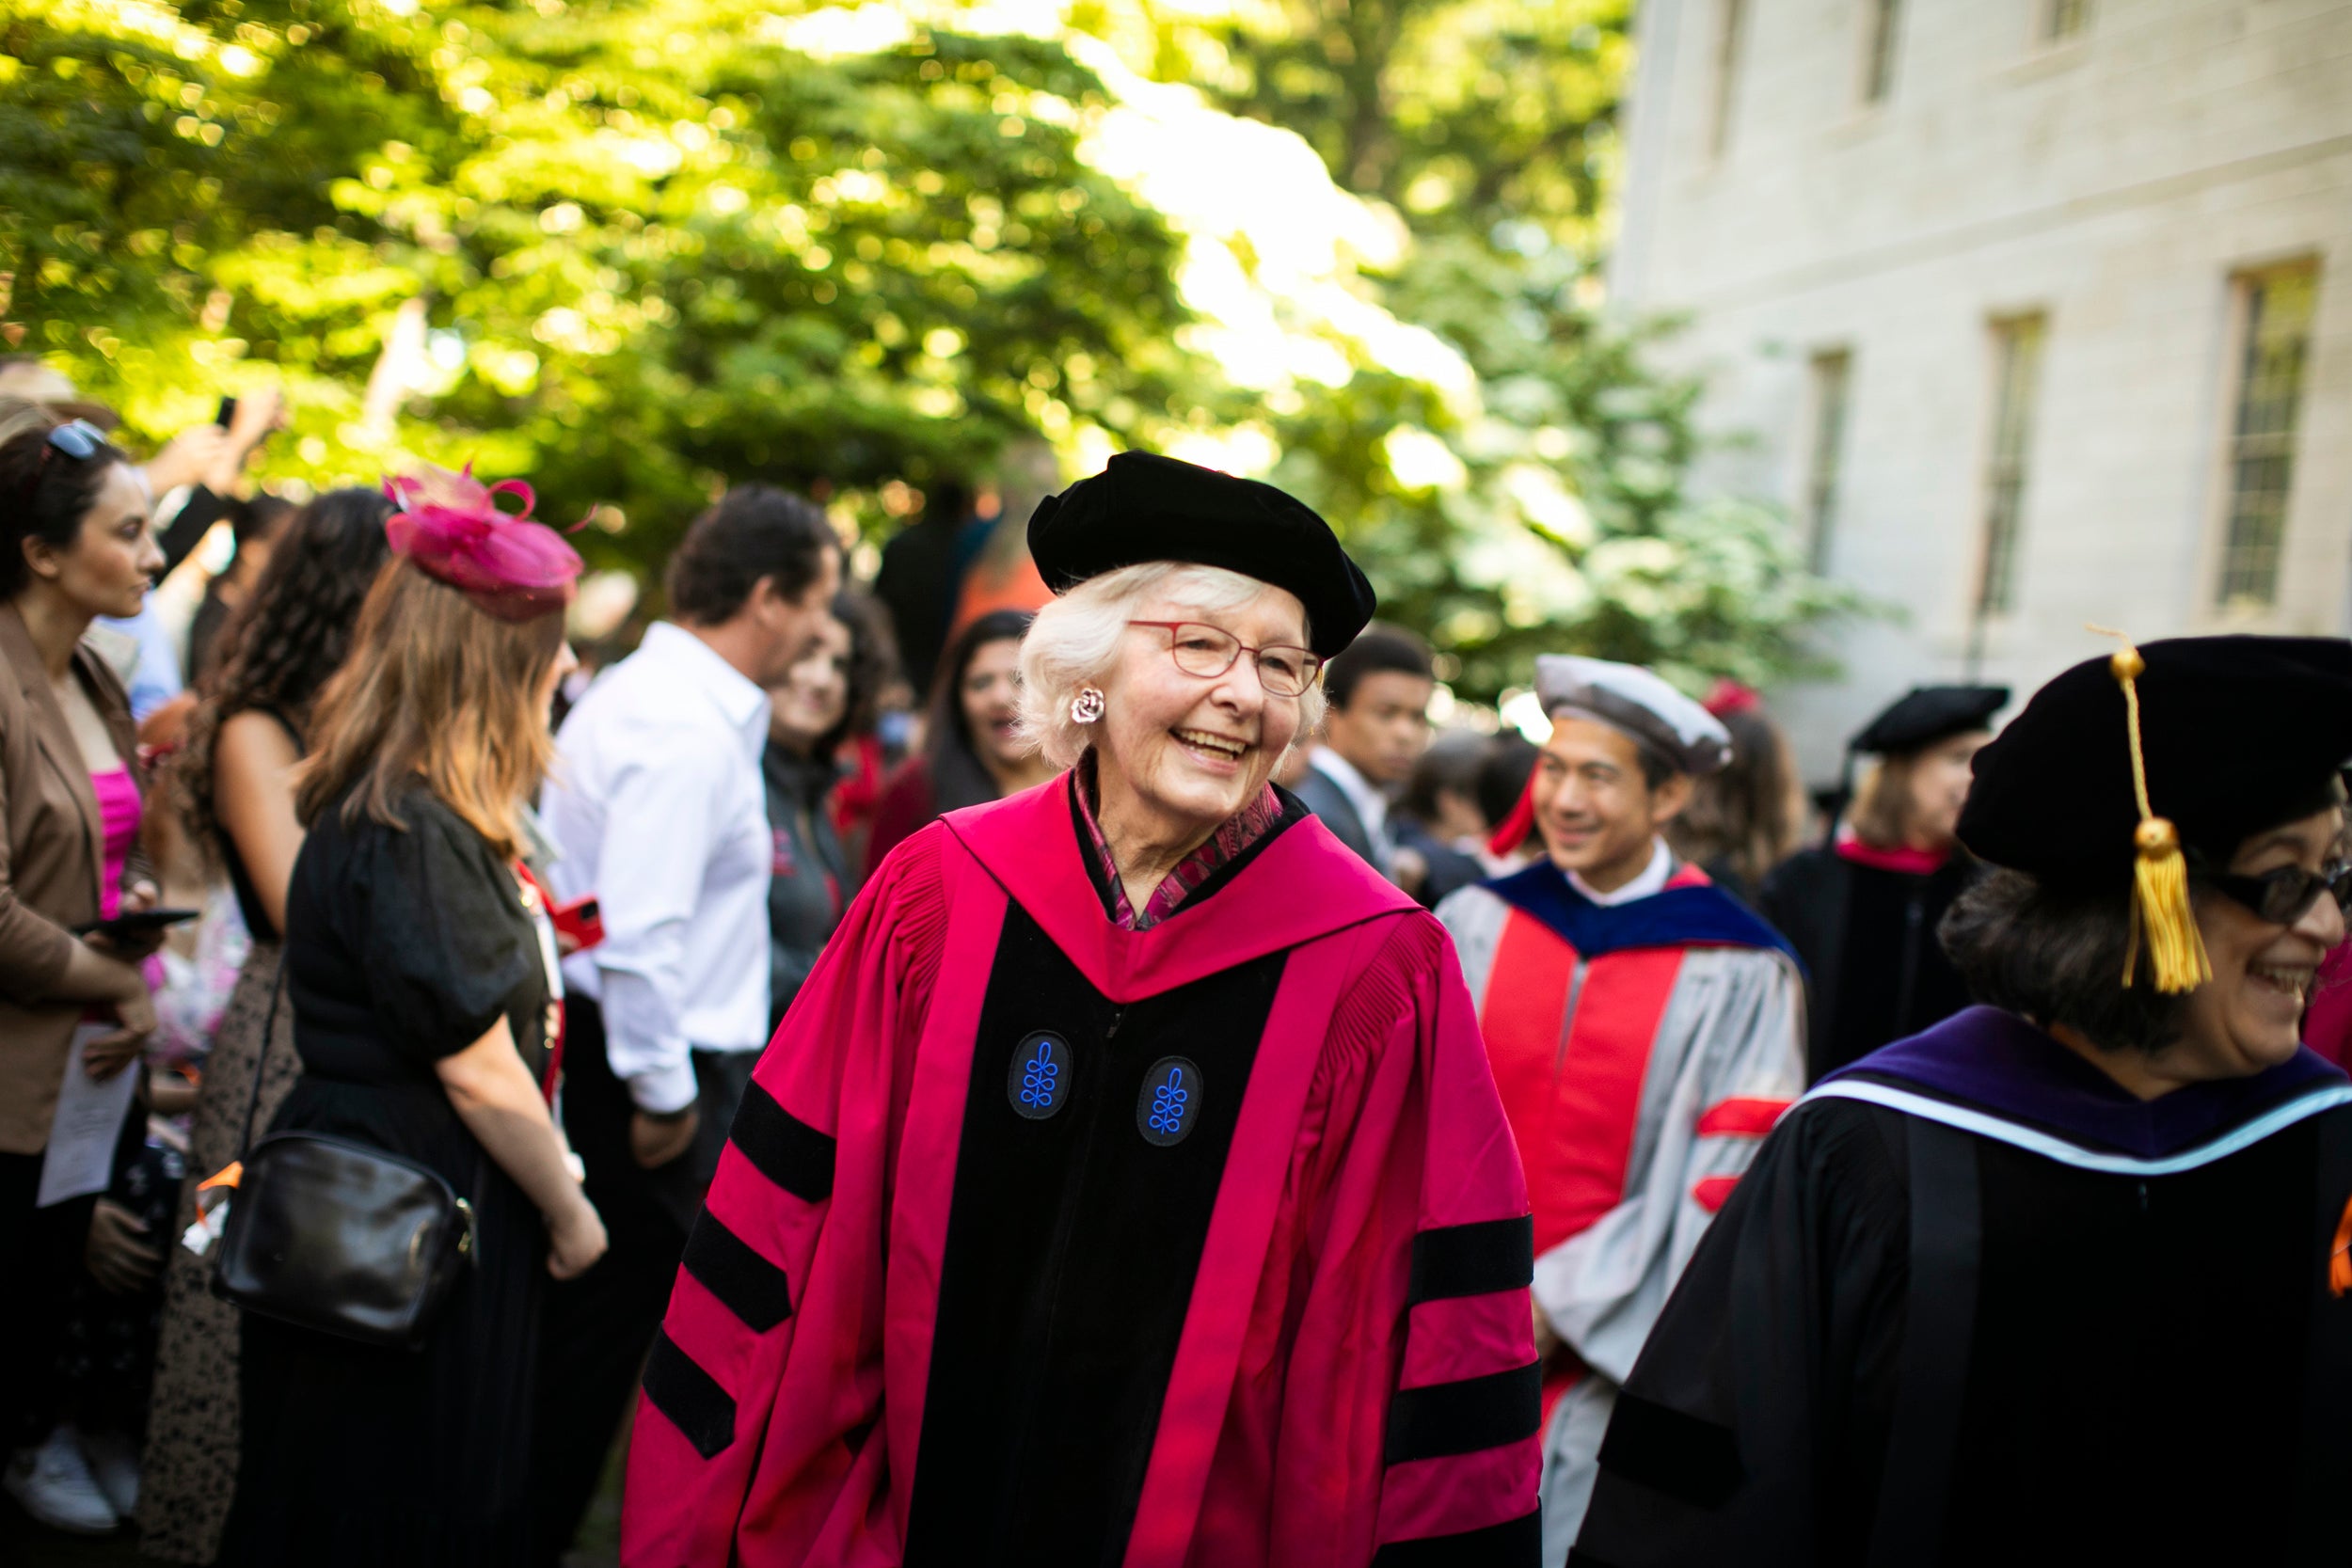 Honorary degree recipient Margaret Marshall is pictured during the procession.